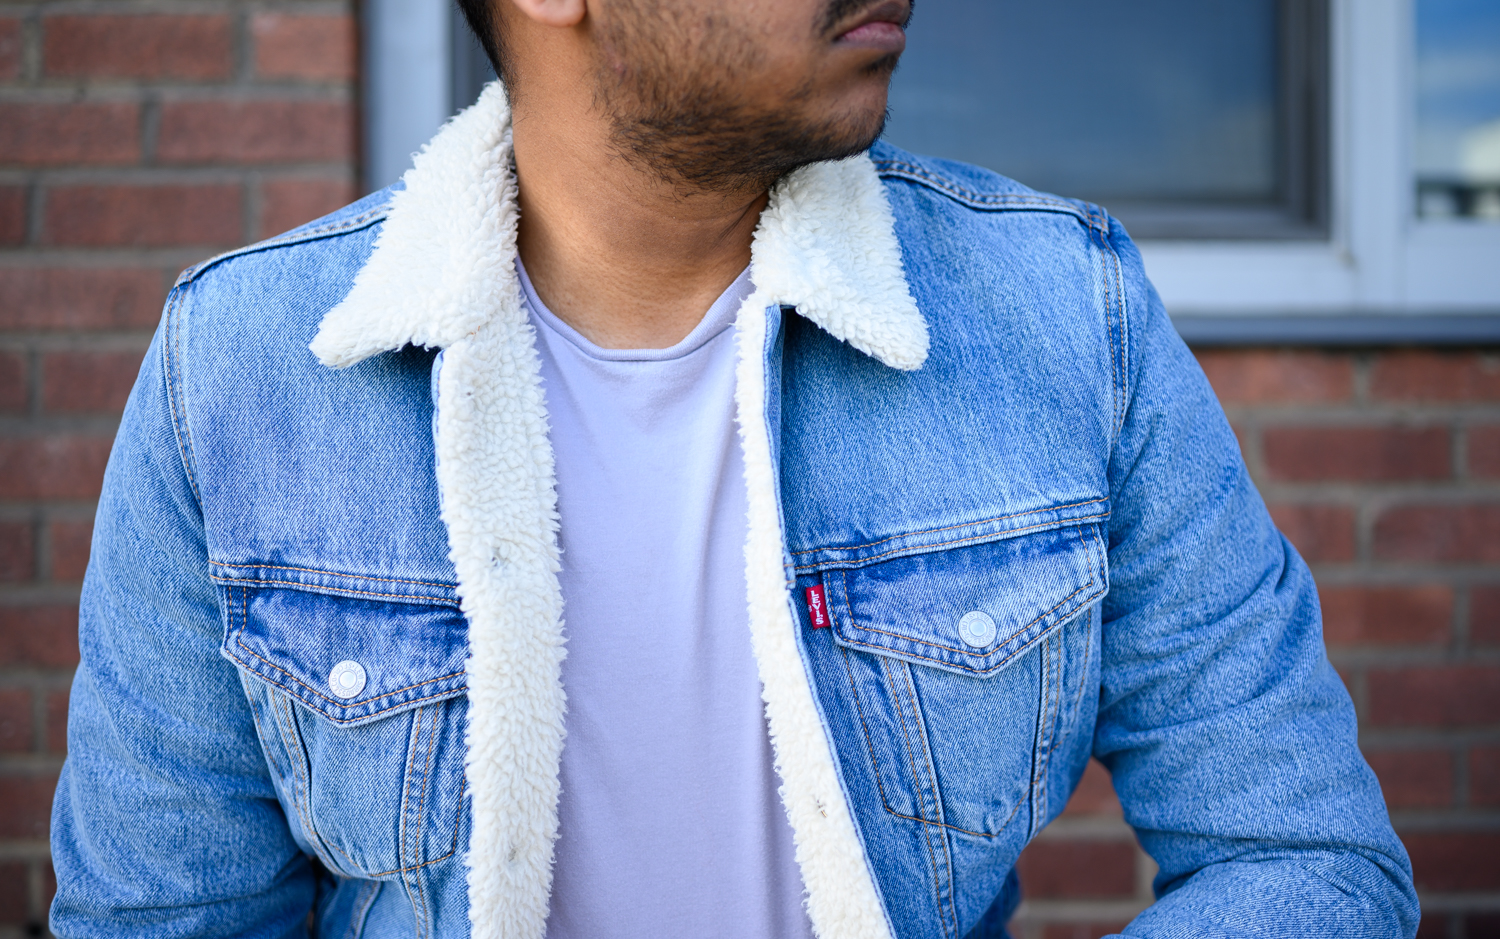 Google and Levi's Deliver Two More Denim Jackets With Jacquard